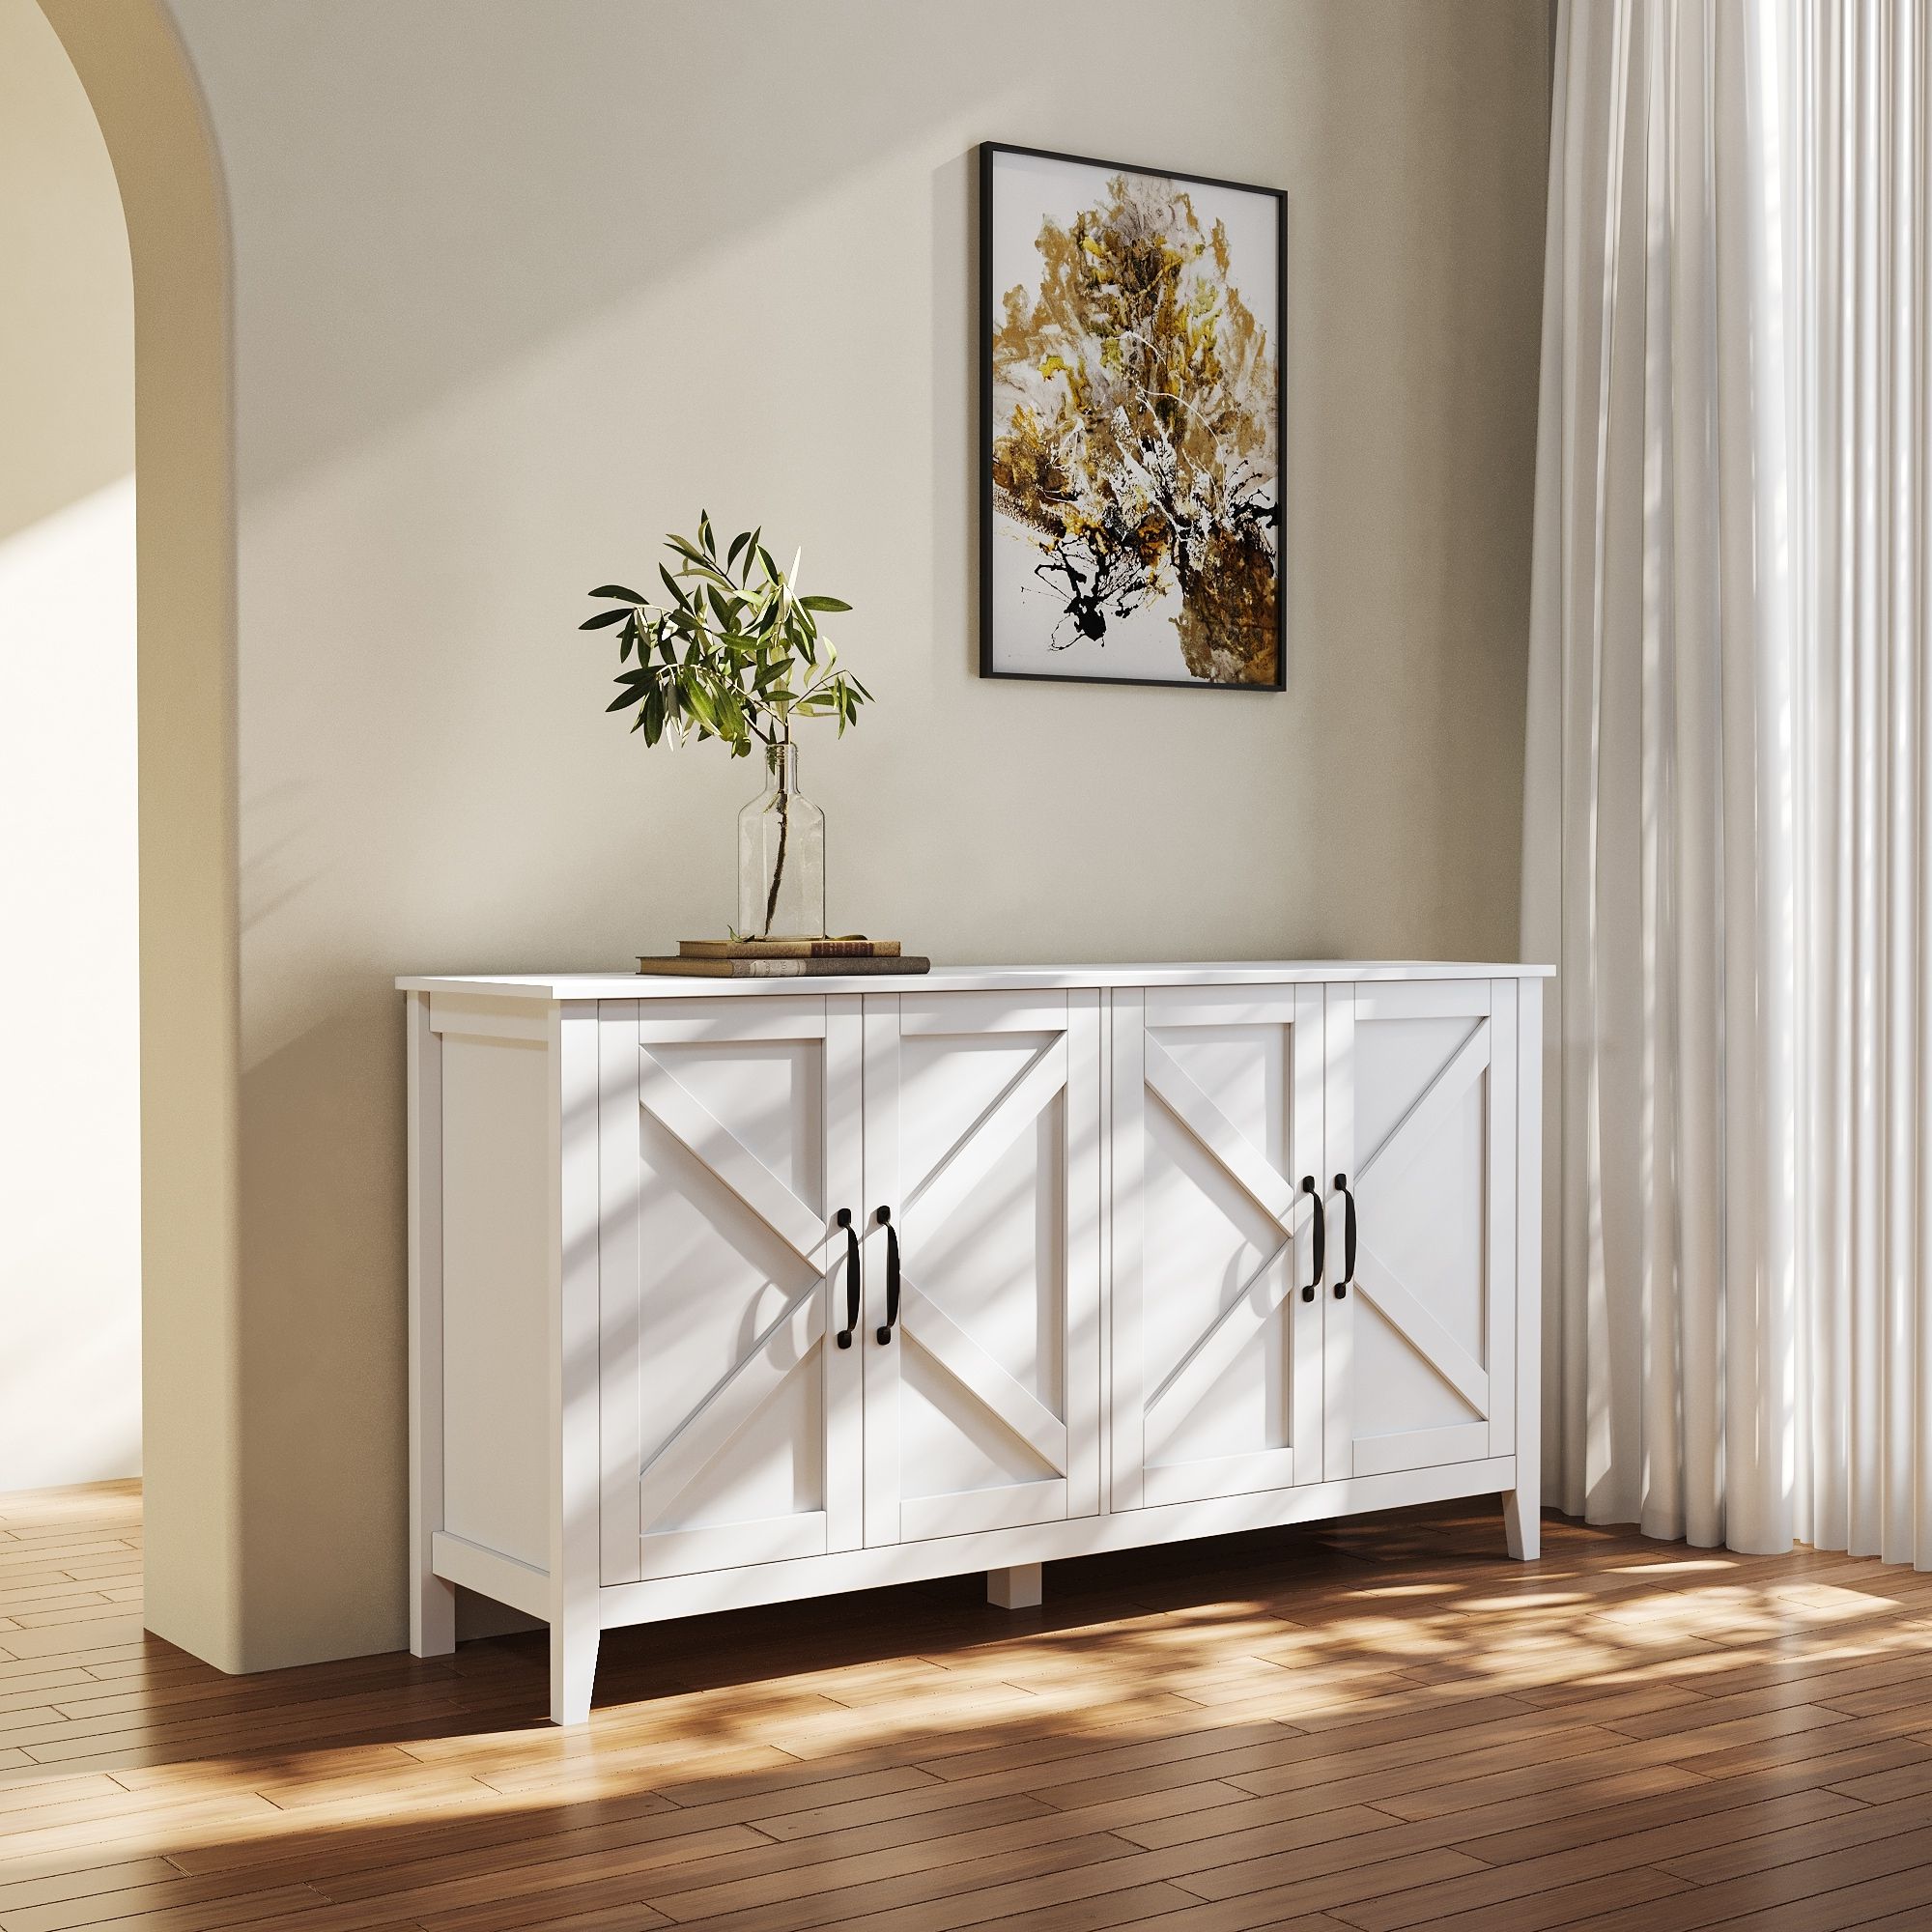 Sideboard Storage Entryway Floor Cabinet With 4 Shelves – Bed Bath & Beyond  – 37068169 With Best And Newest Sideboards For Entryway (Photo 5 of 15)